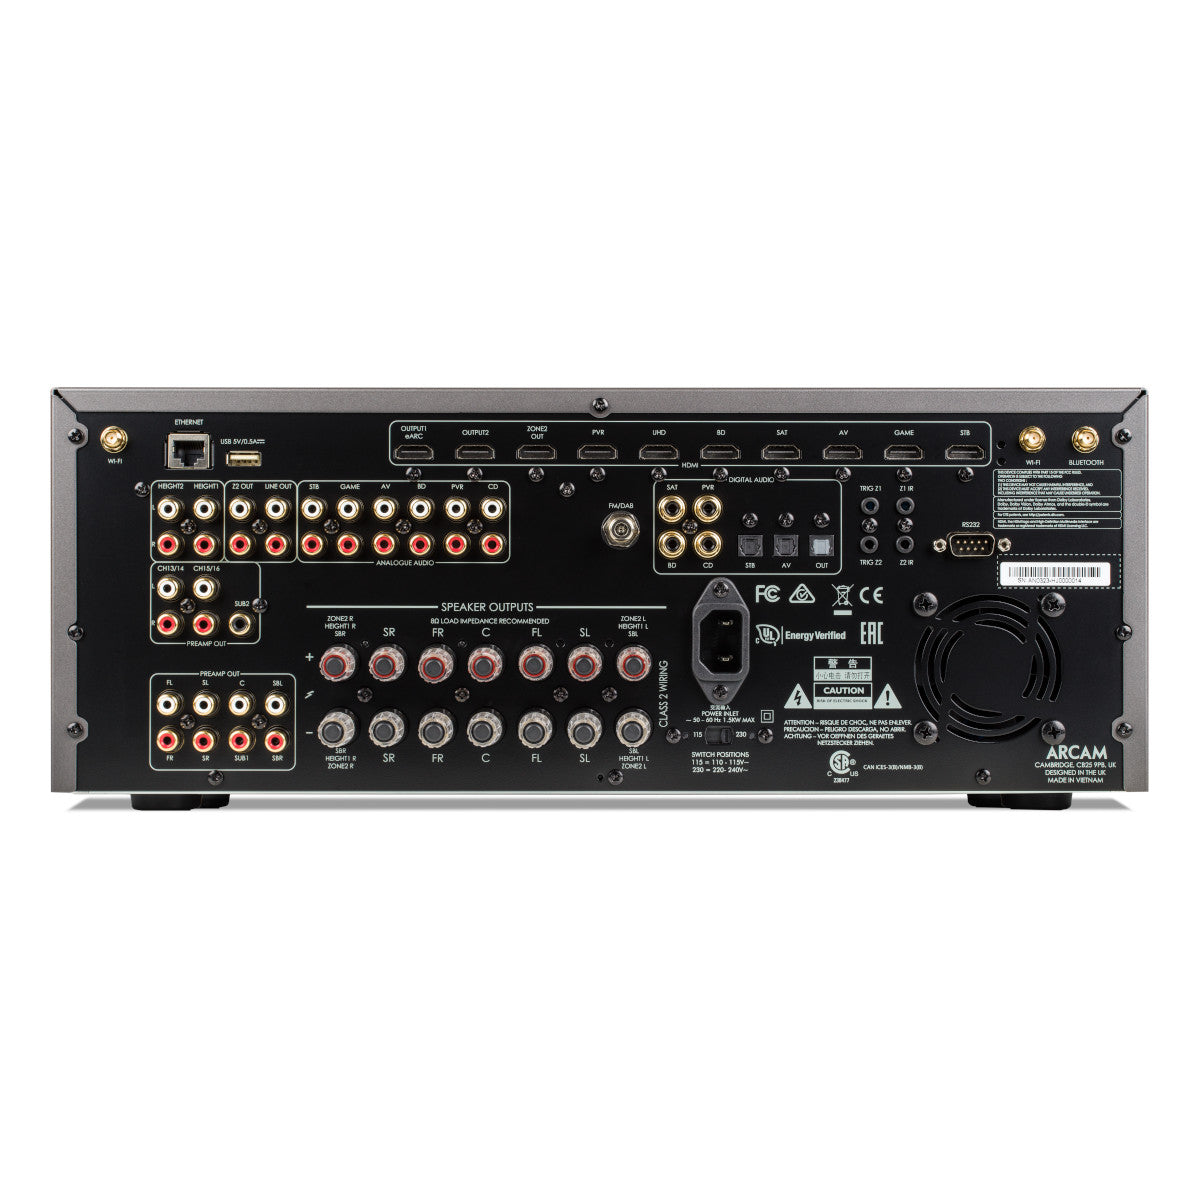 Arcam AVR20 Class AB 7.2 Channel Home Theater Receiver with Dolby Atmos & DTS:X 9.1.6 decoding